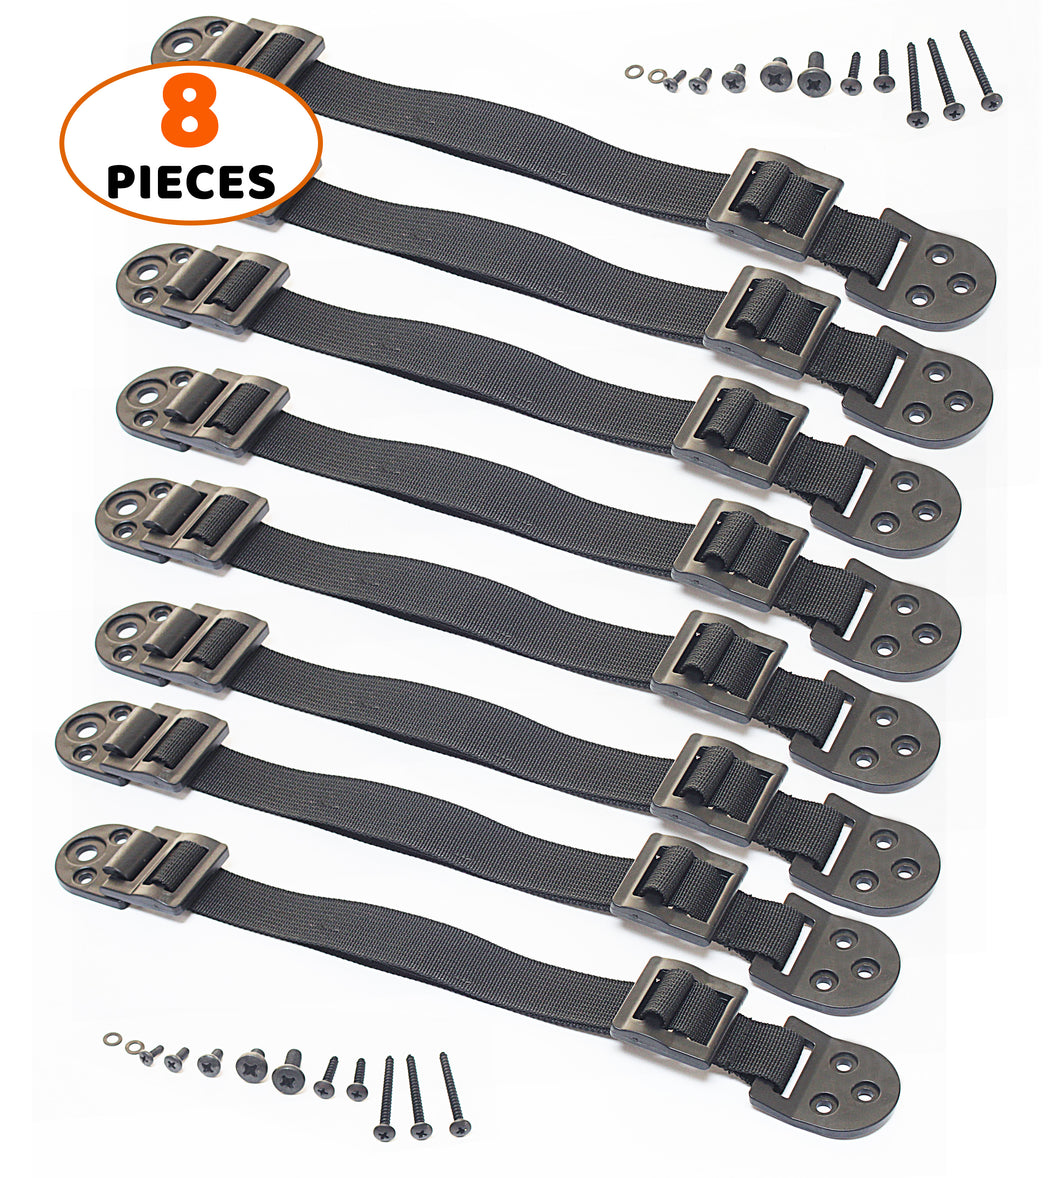 Furniture Straps - Anti Tip Strap for Baby Proofing & Child Safety - 8 Pack of Adjustable Wall Straps and TV Straps - Fixings to Anchor Shelves & Cabinets(Black)